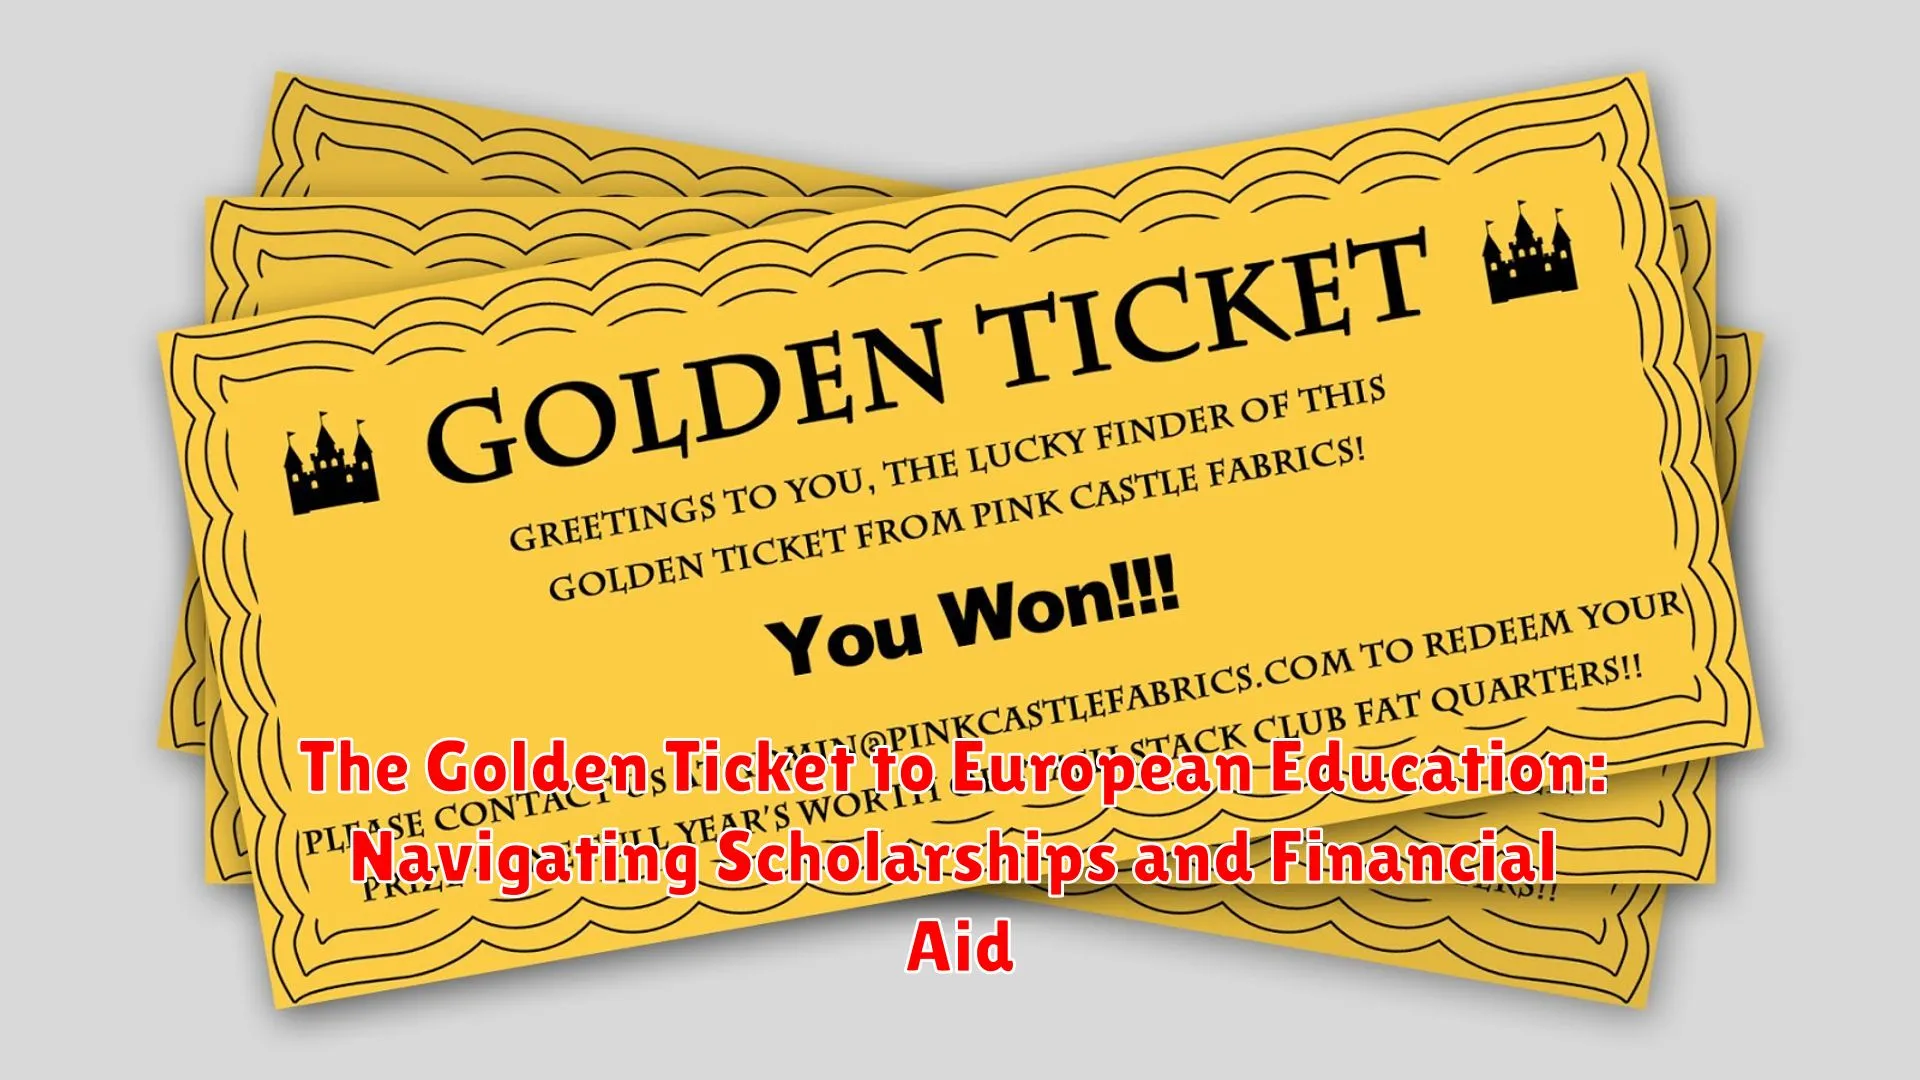 The Golden Ticket to European Education: Navigating Scholarships and Financial Aid